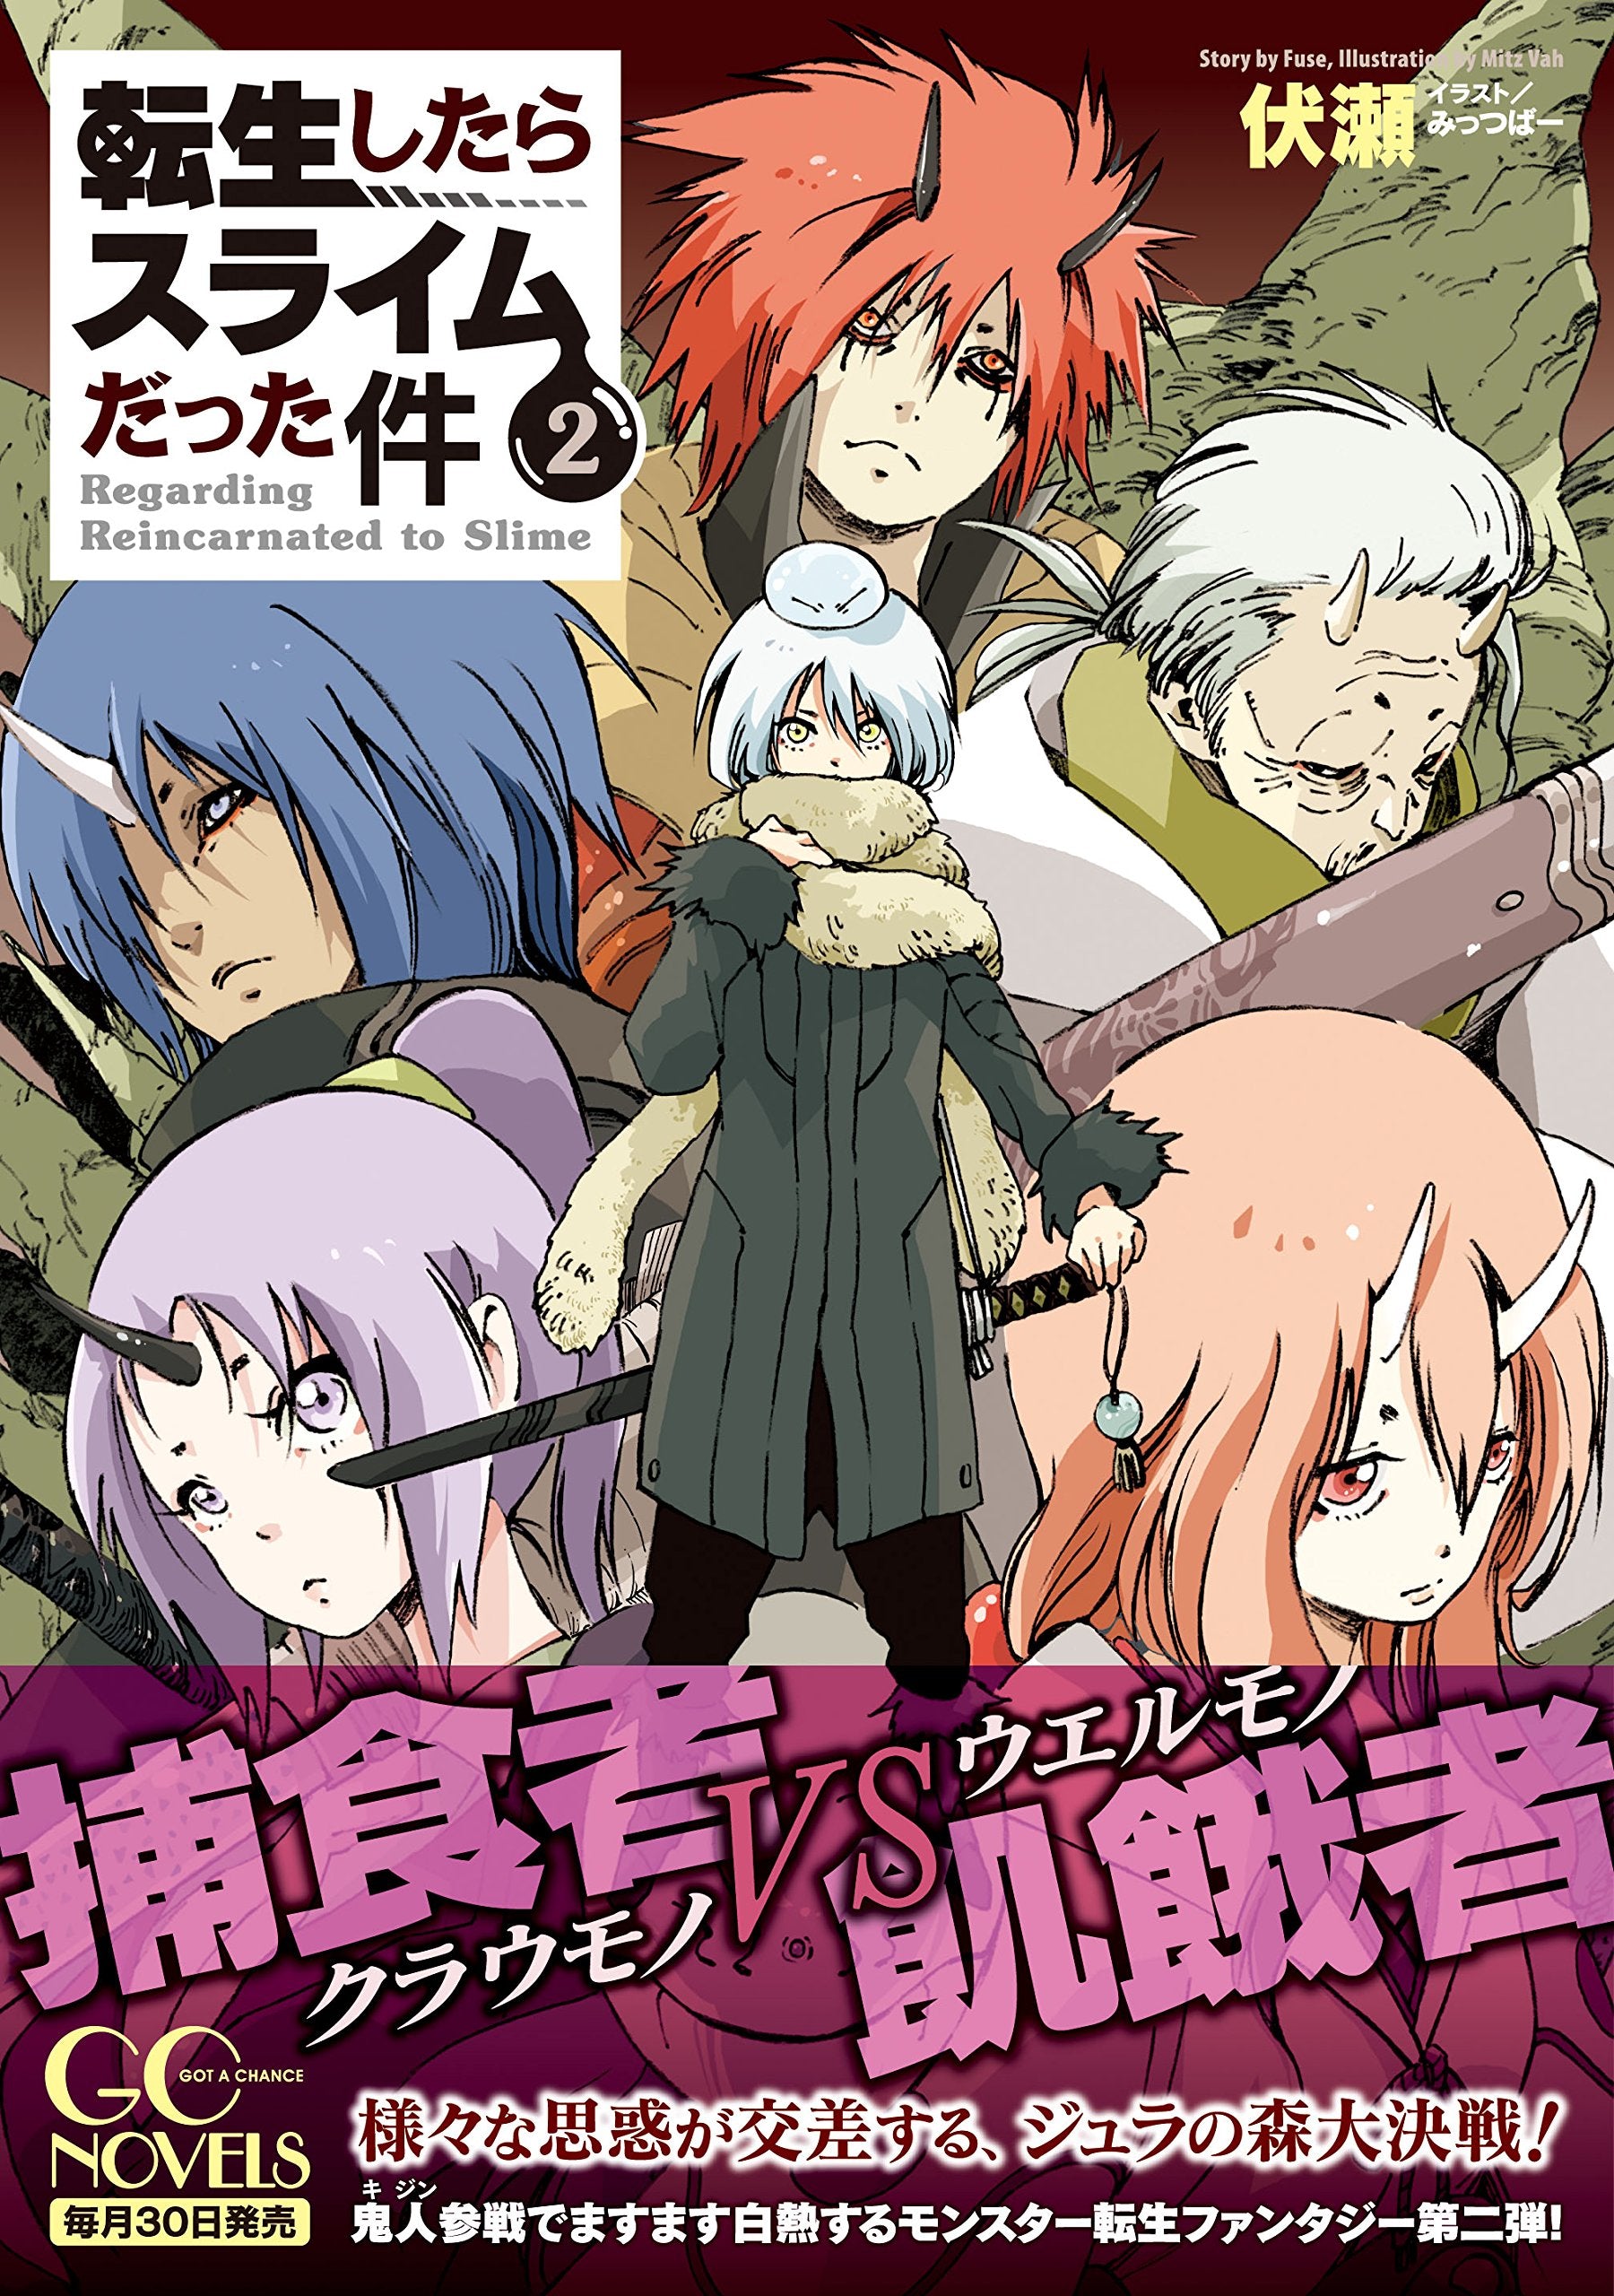 That Time I Got Reincarnated as a Slime (Tensei shitara Slime Datta Ken) 5  Special Edition with 2 Oppekepe – Japanese Book Store